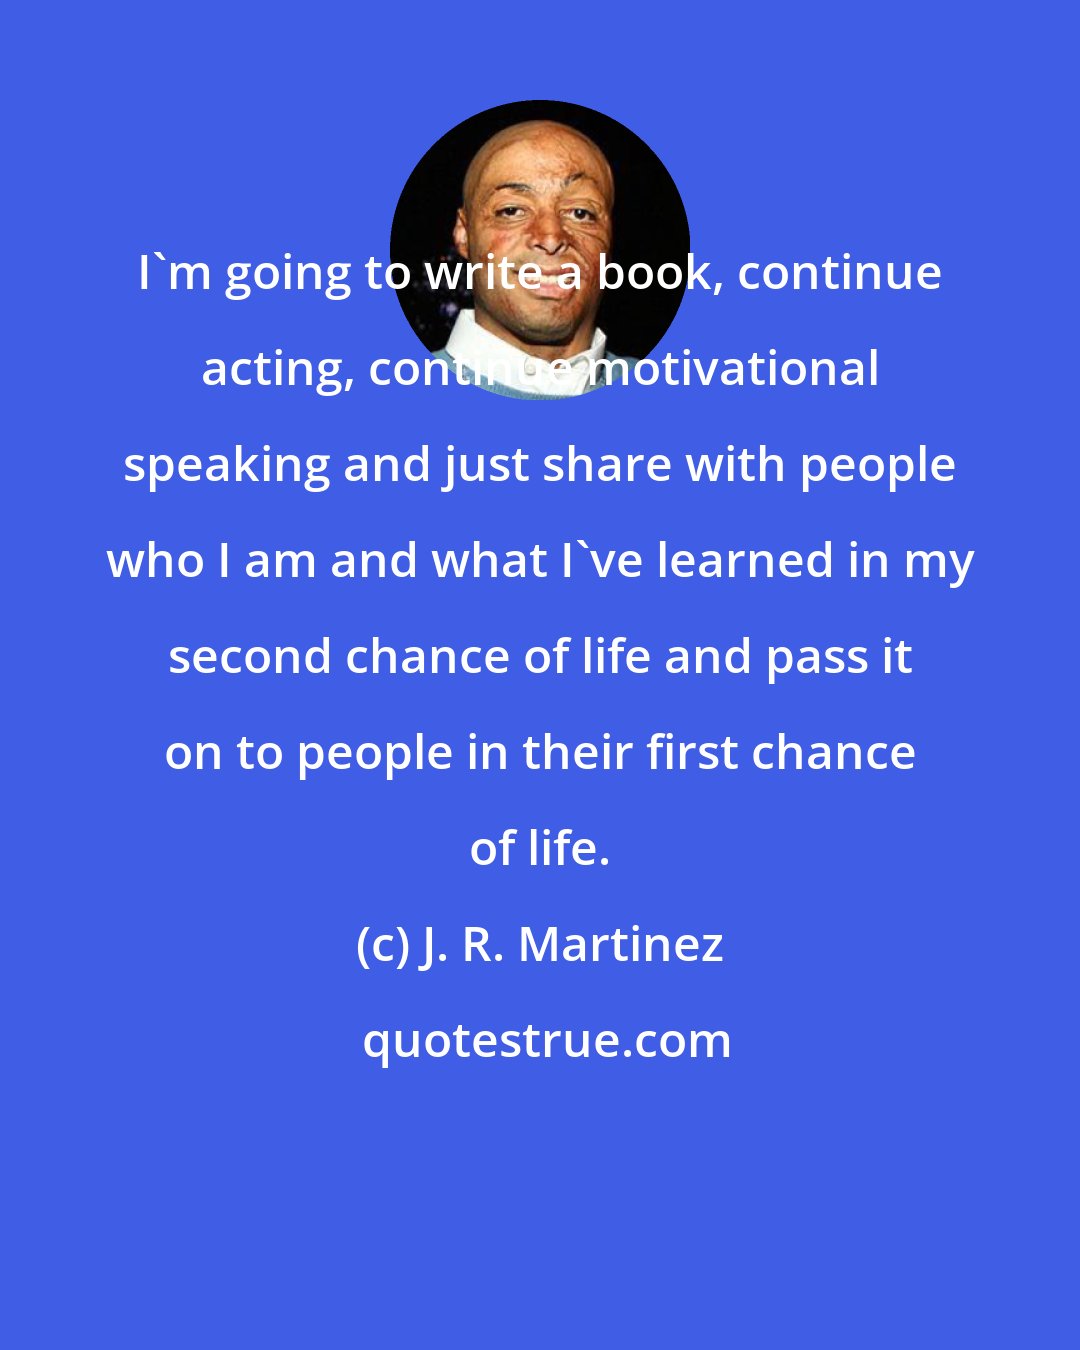 J. R. Martinez: I'm going to write a book, continue acting, continue motivational speaking and just share with people who I am and what I've learned in my second chance of life and pass it on to people in their first chance of life.